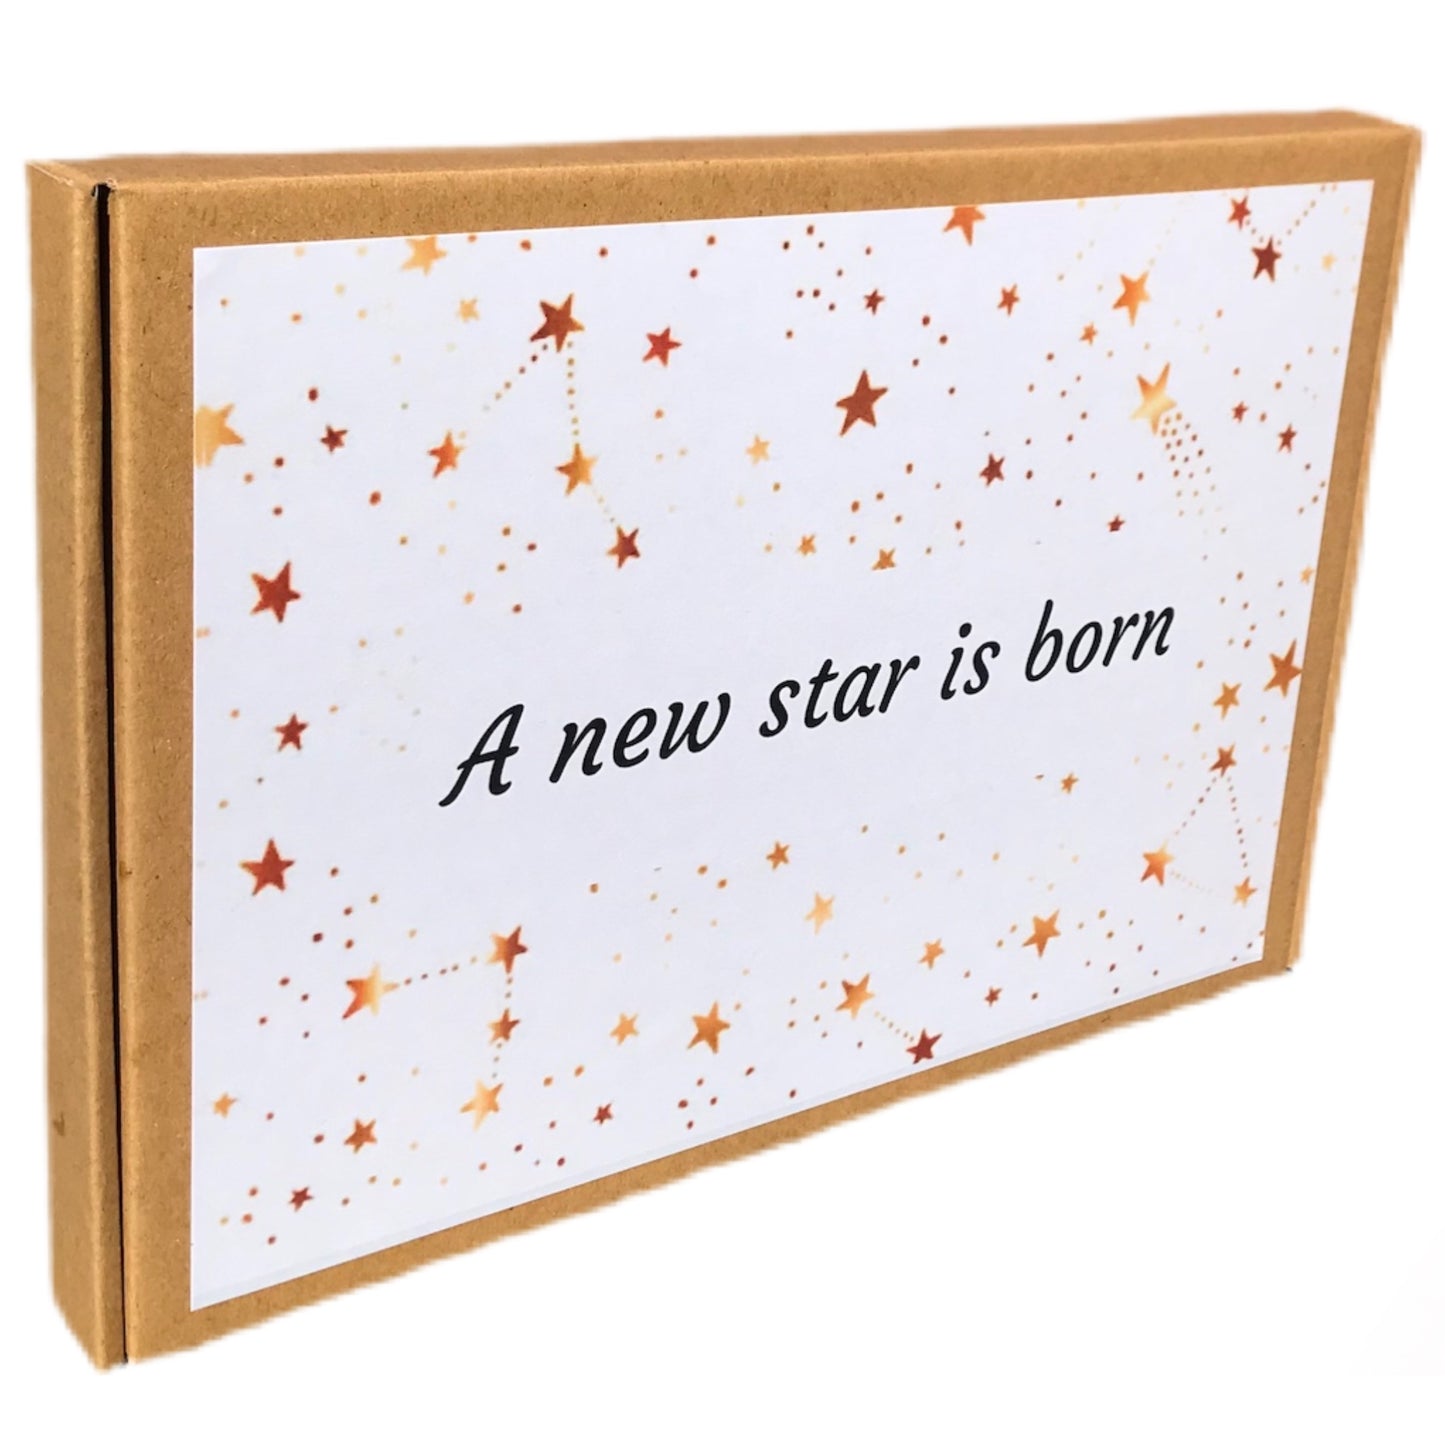 Keepsake collection - a new star is born